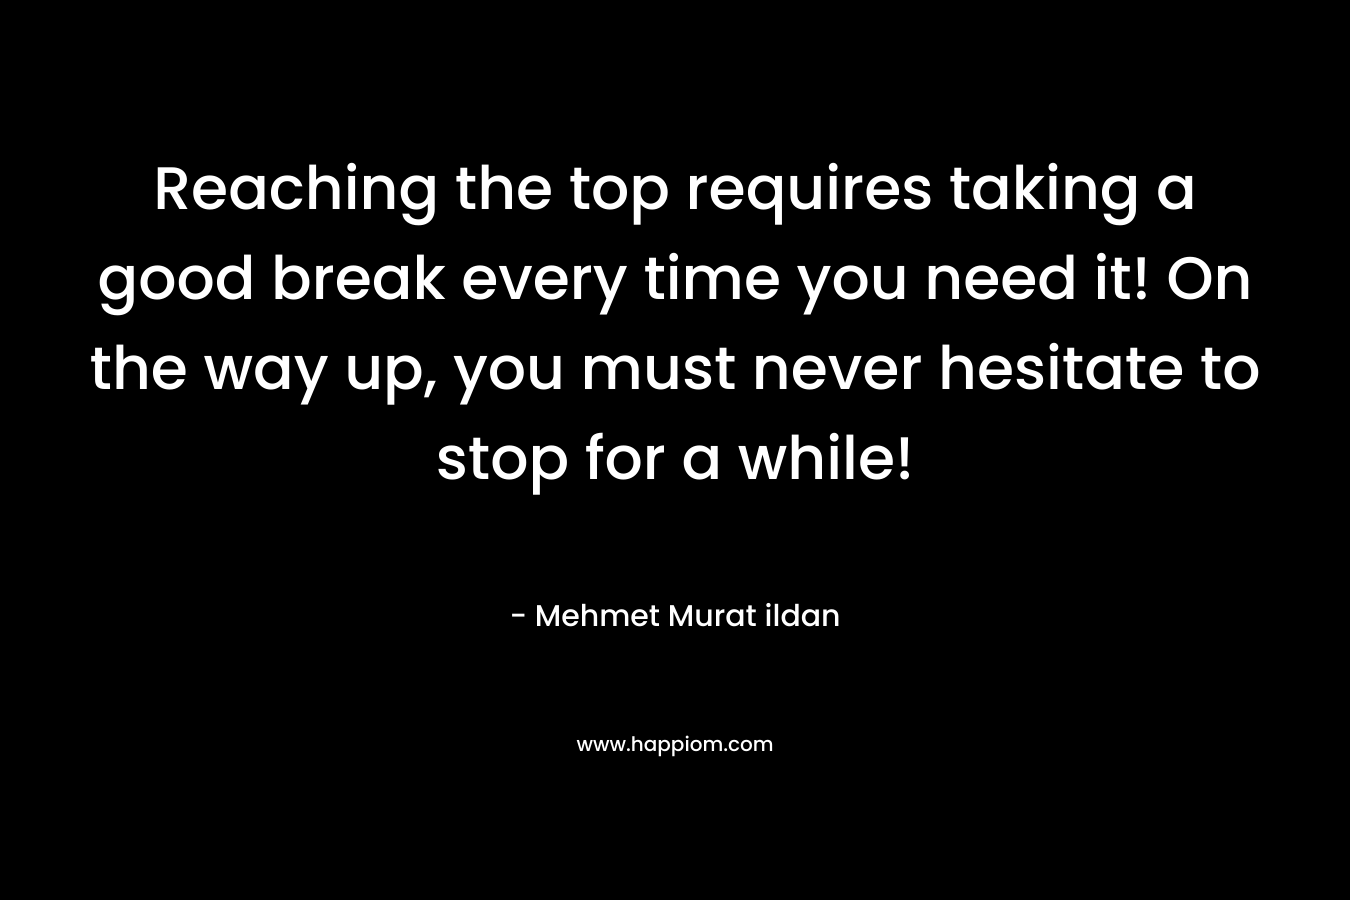 Reaching the top requires taking a good break every time you need it! On the way up, you must never hesitate to stop for a while! – Mehmet Murat ildan